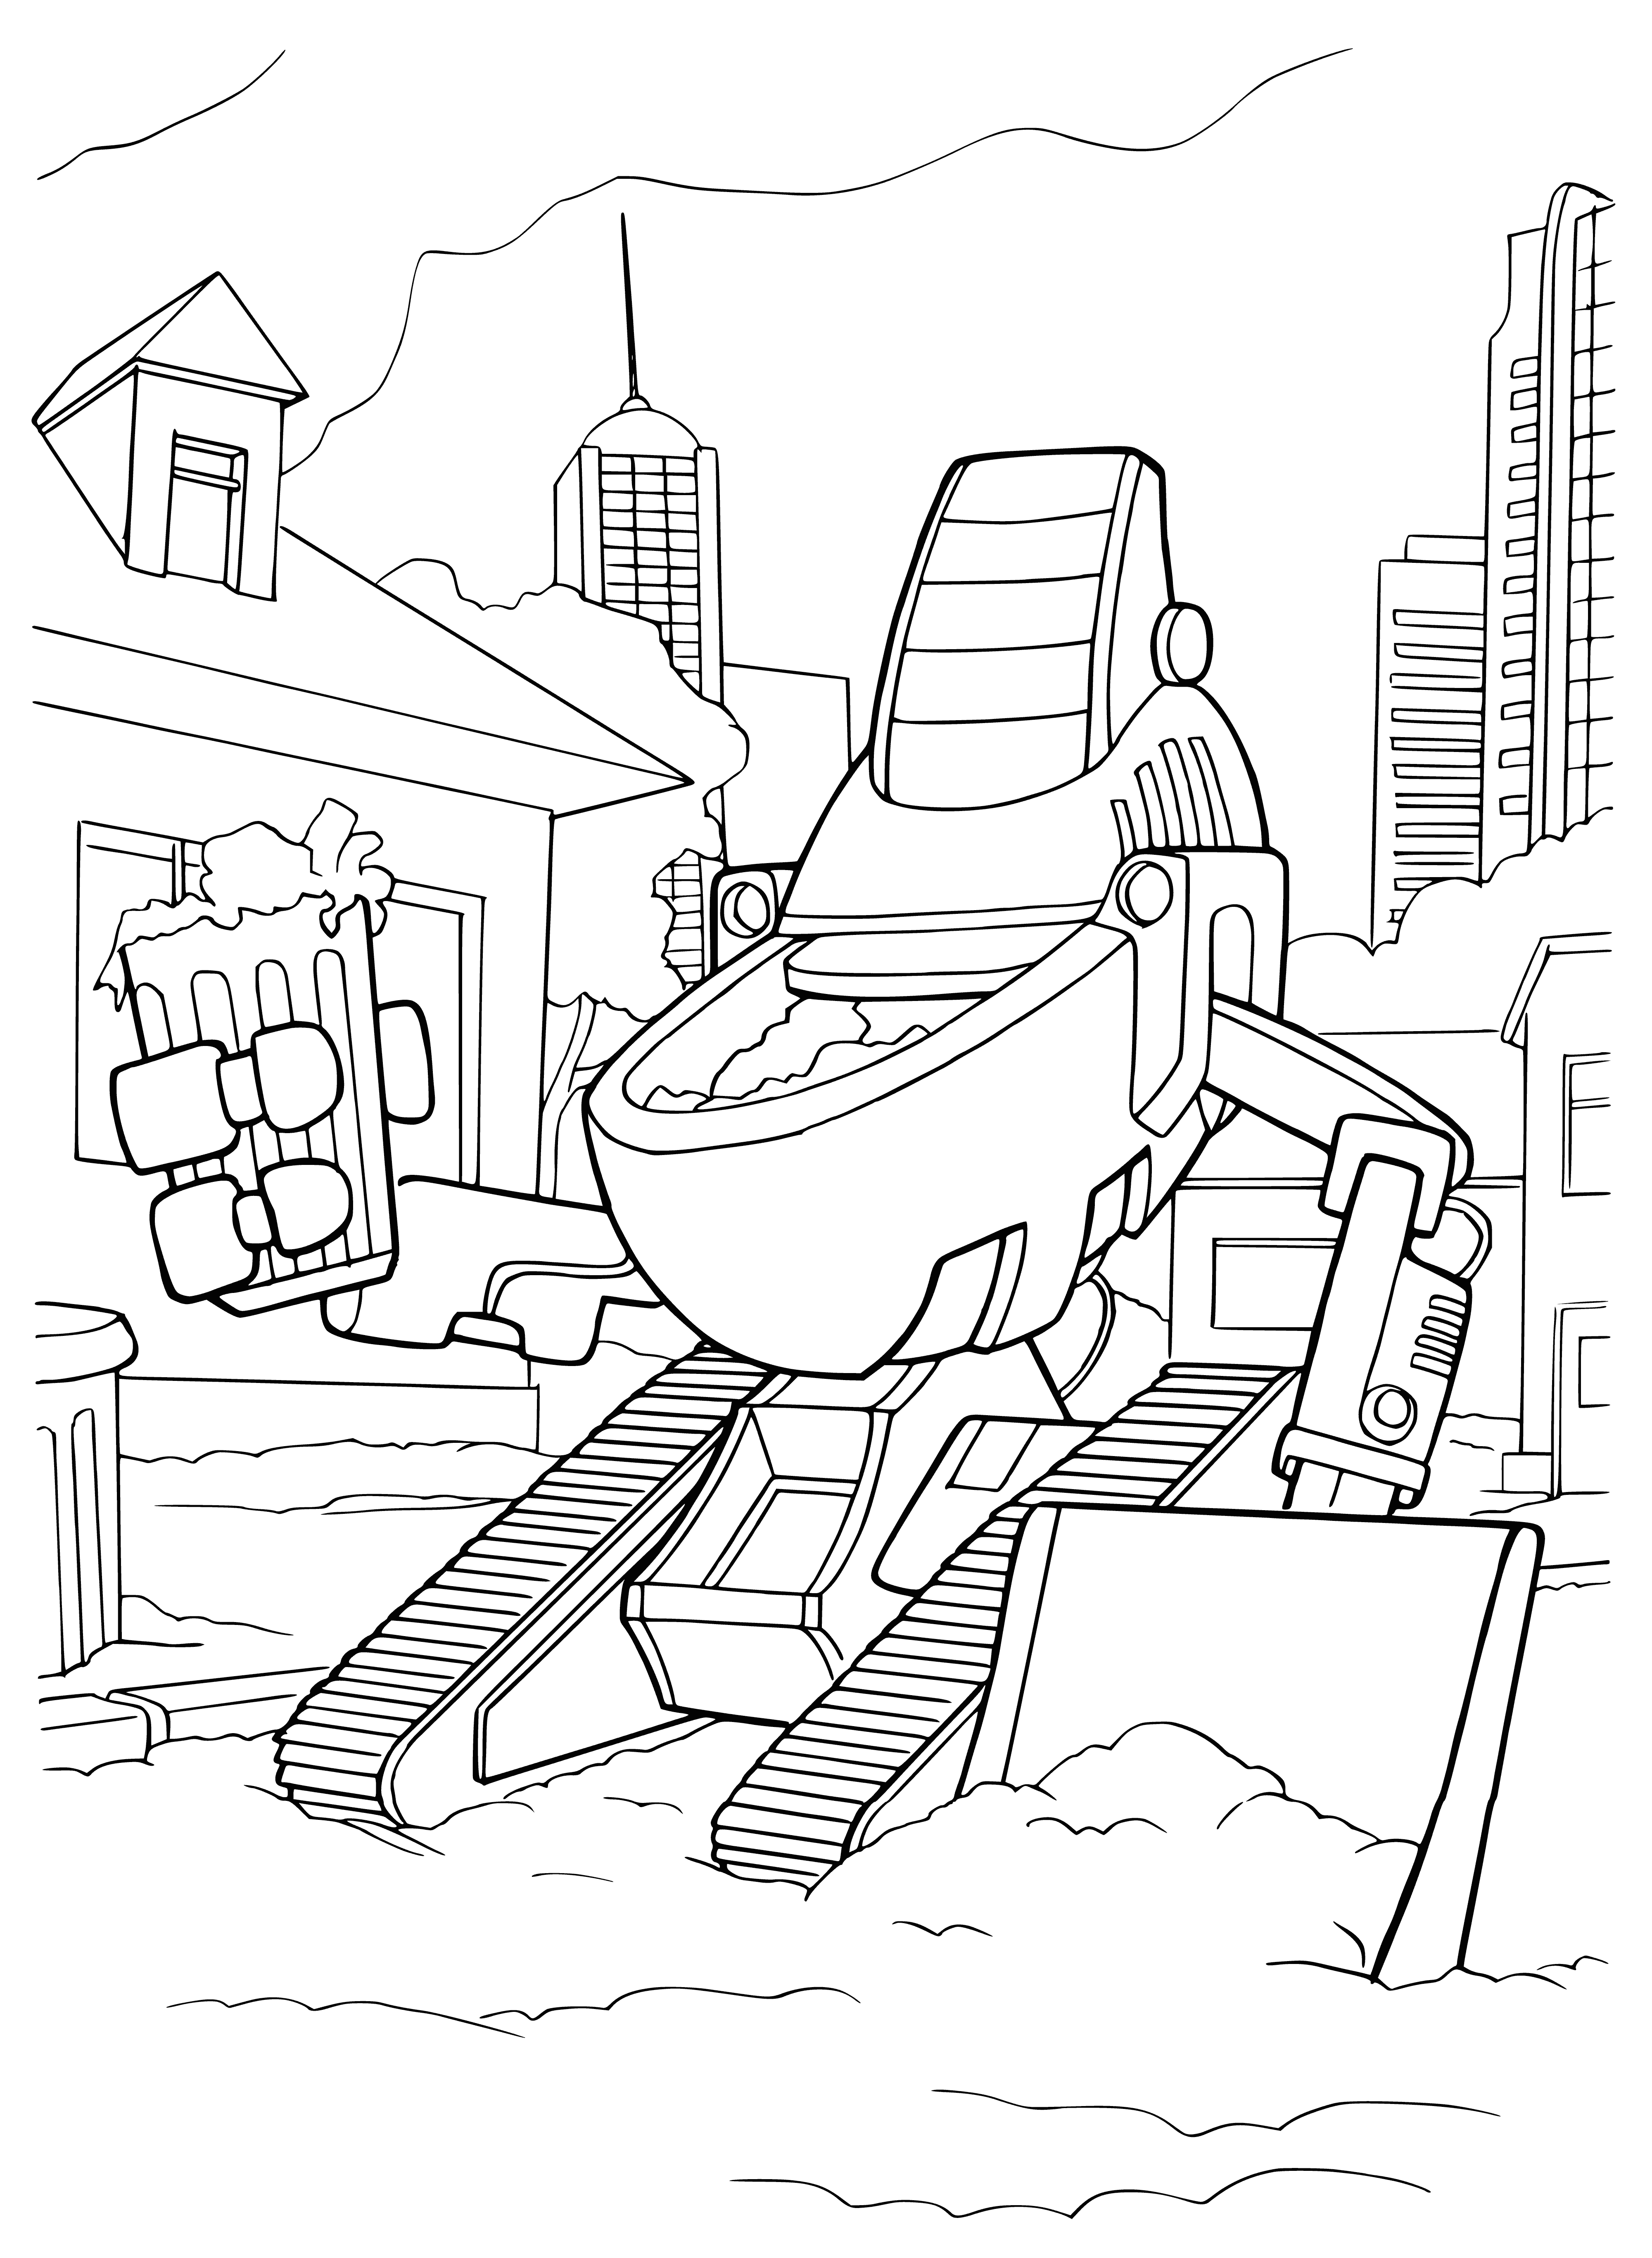 coloring page: Robots of the future can help with housework- garbage duty model has large mouth, compactor, treads and slim build for easy maneuvering.